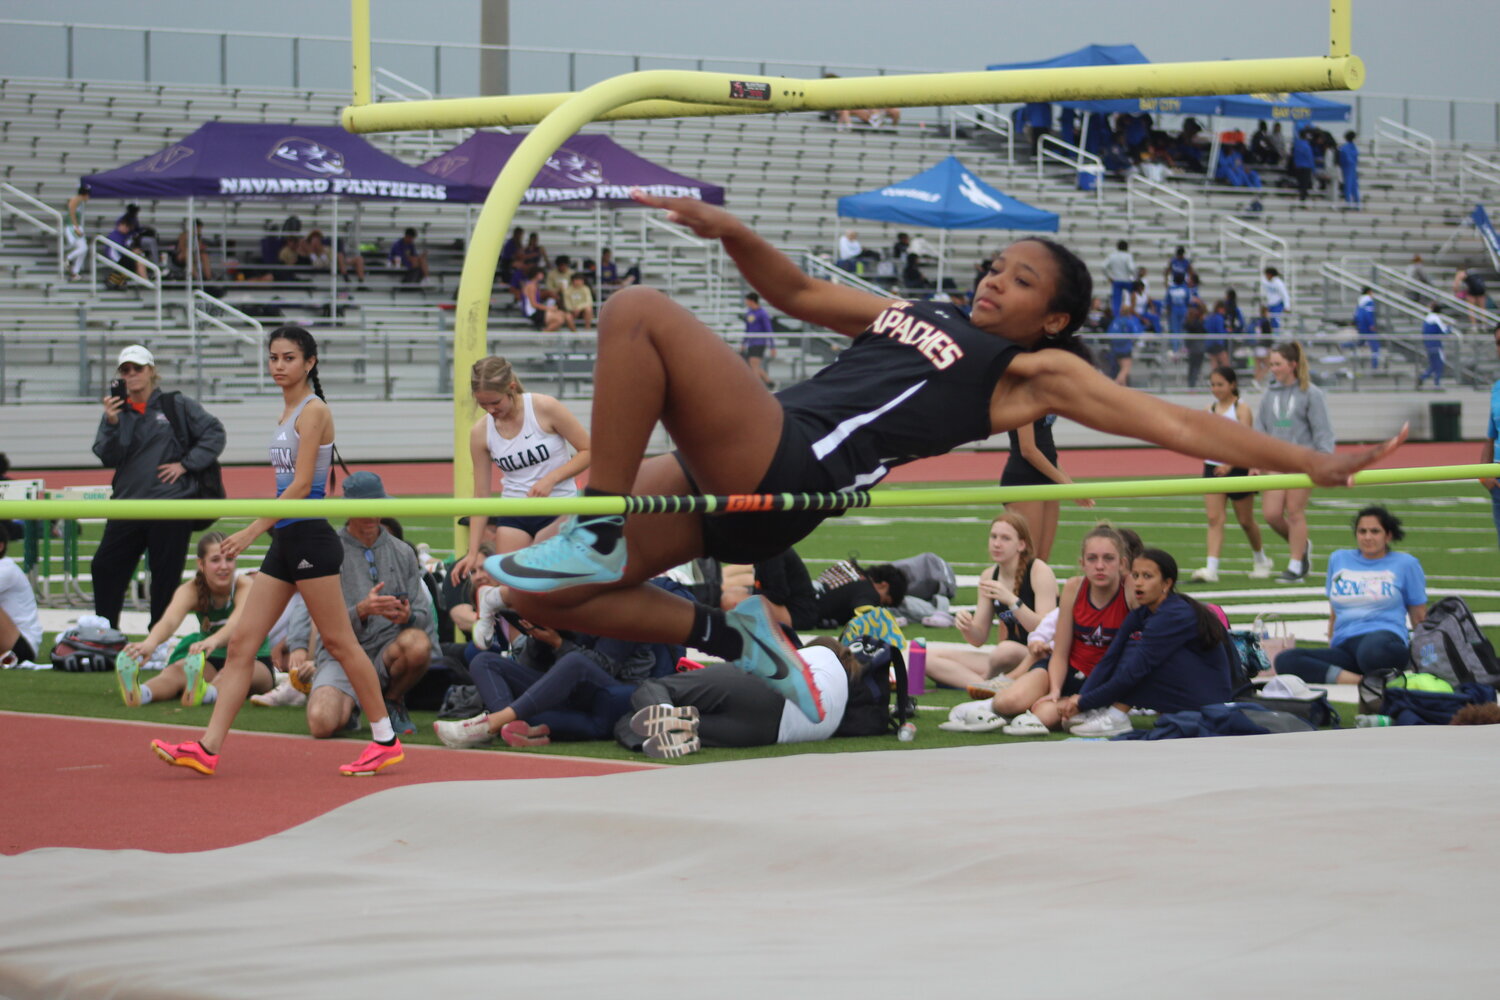 Lady Apaches’ Malaiyah Mayo competes in the high jump competition of the Cuero track meet Thursday, March 7.